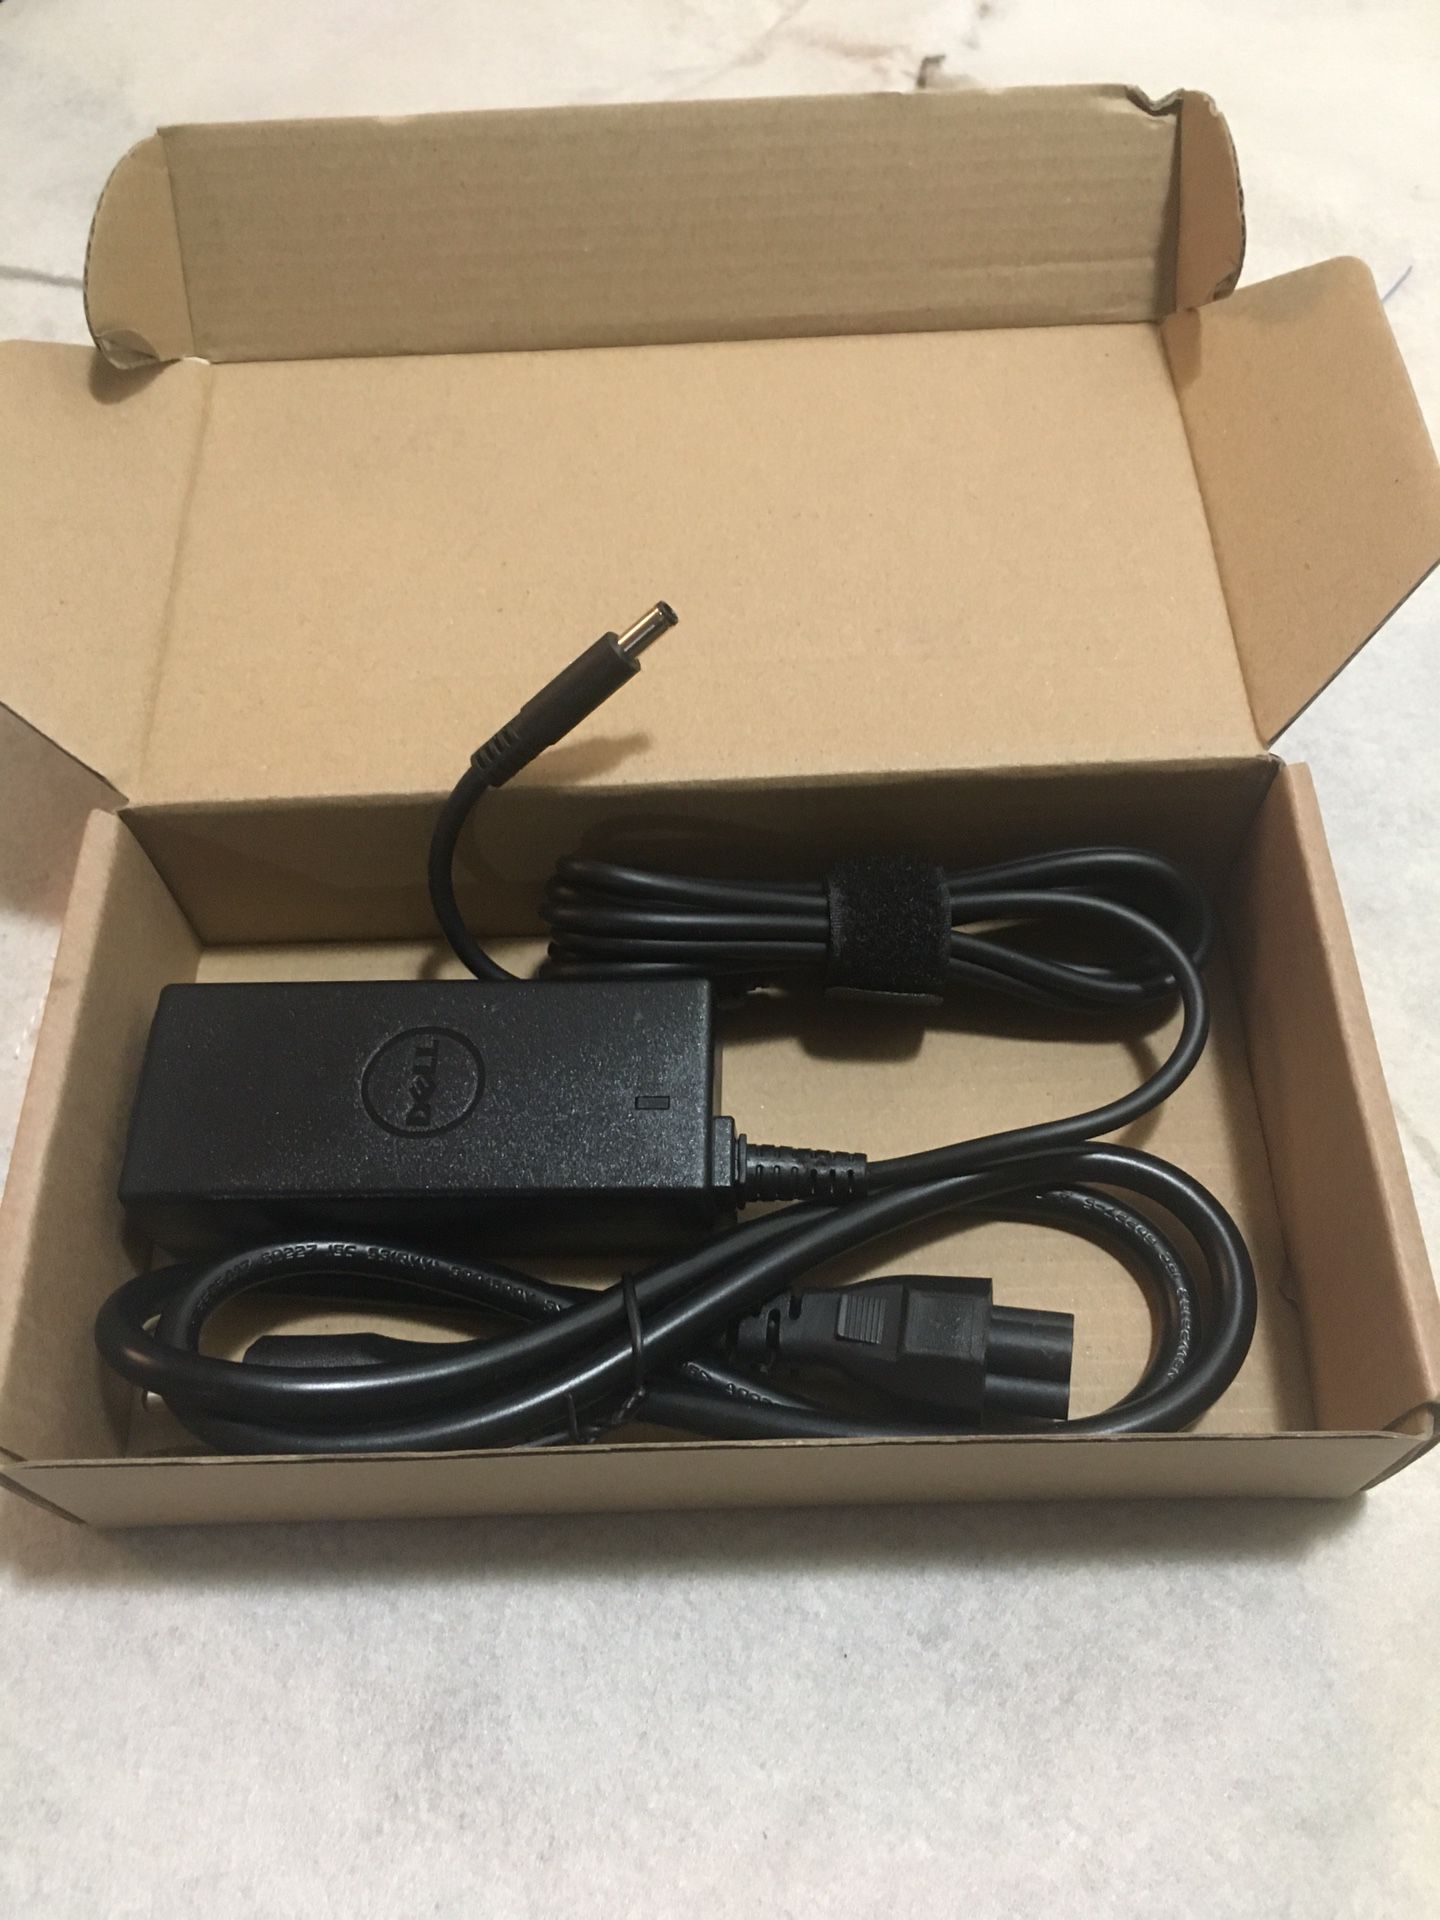 Dell 45W Replacement AC Adapter for Dell